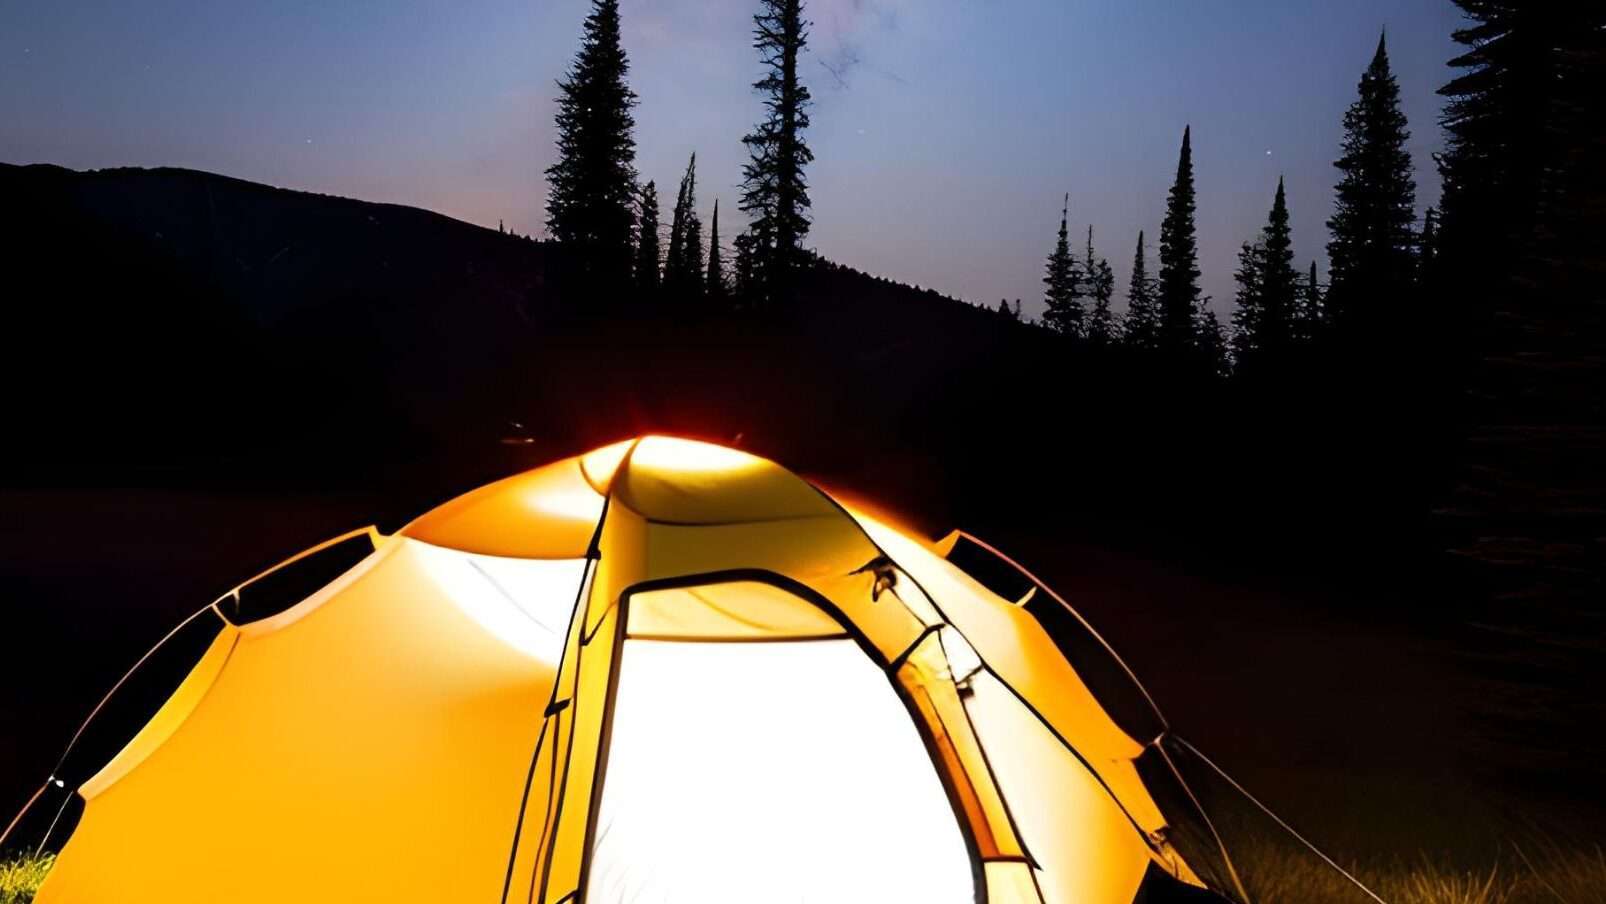 Tent camping on private property with stars  and mountains